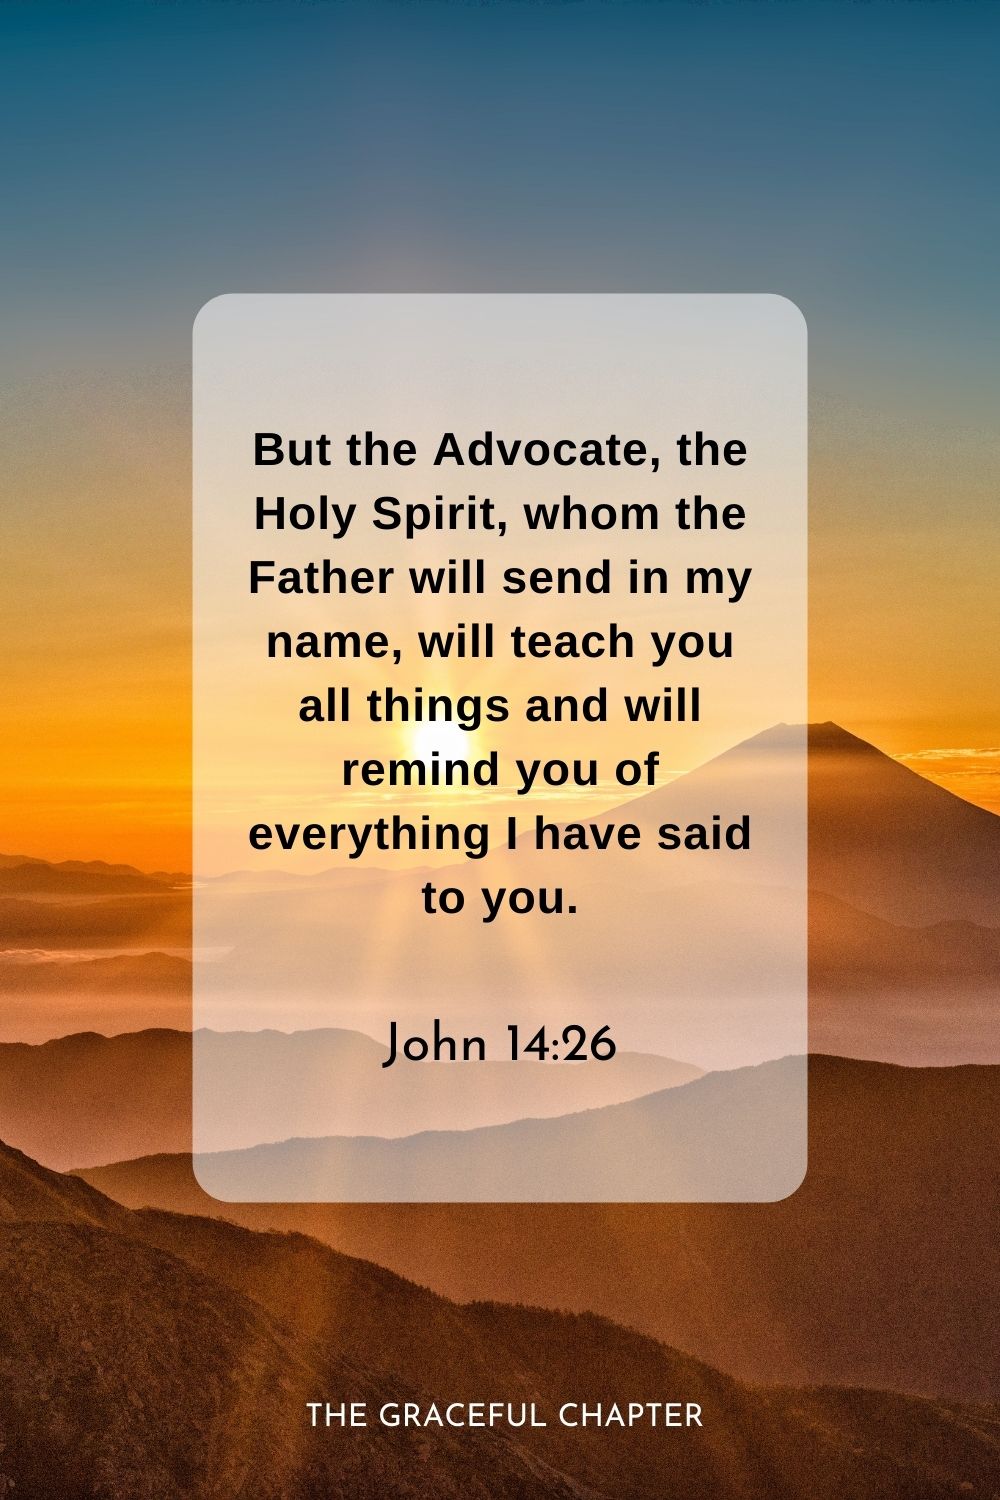 But the Advocate, the Holy Spirit, whom the Father will send in my name, will teach you all things and will remind you of everything I have said to you